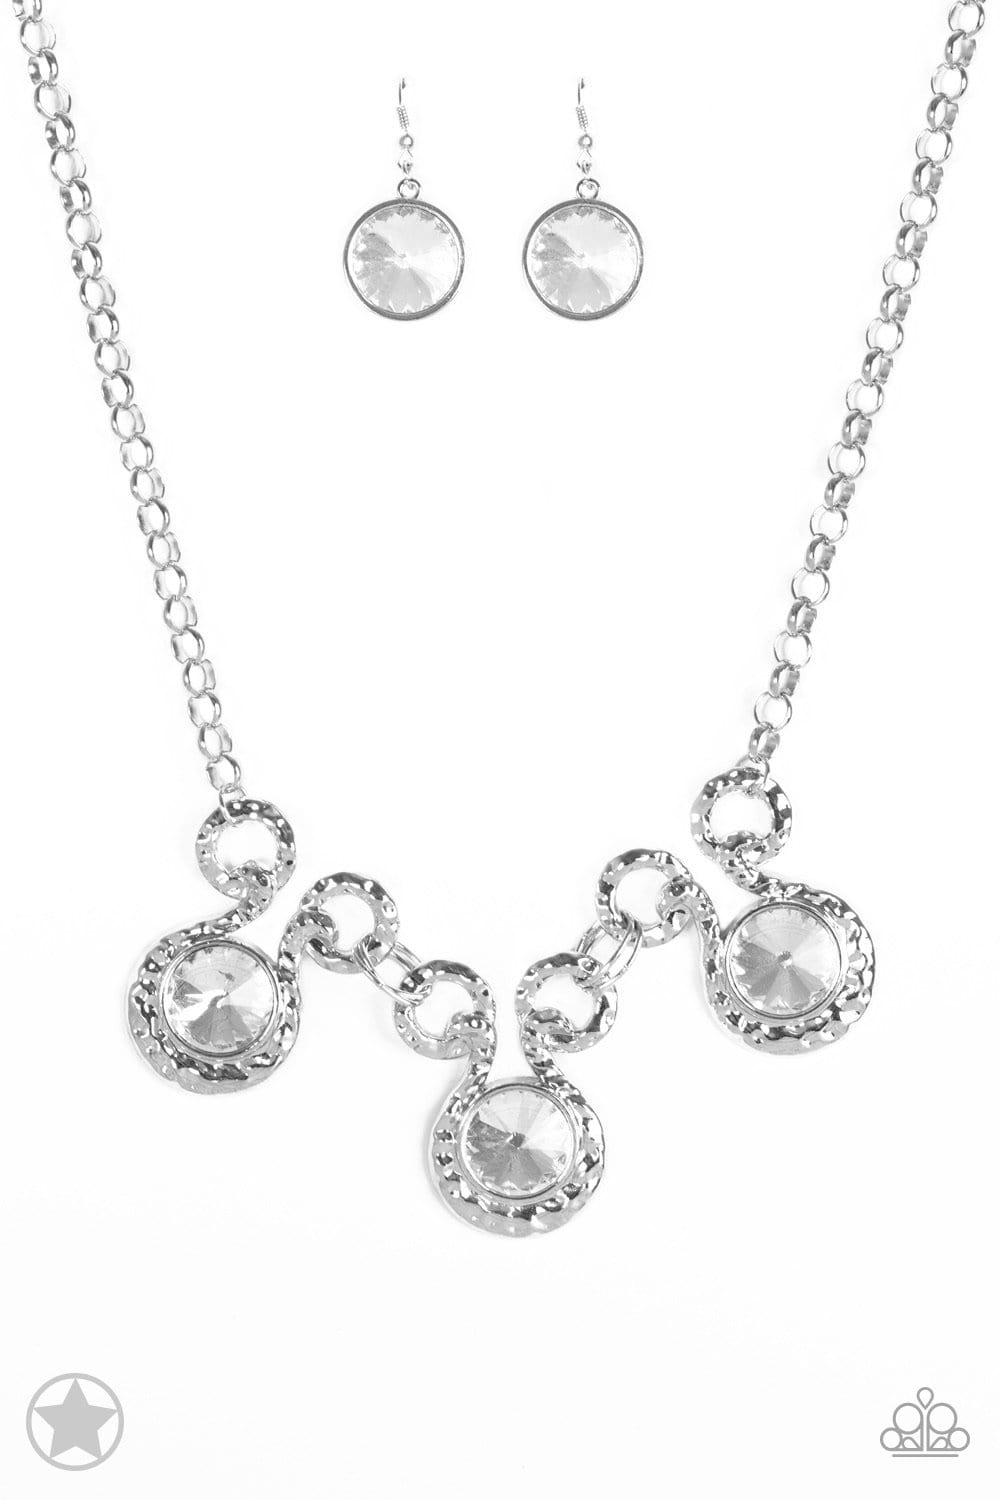 Paparazzi BLOCKBUSTERS: Hypnotized - Silver Necklace - Jewels N’ Thingz Boutique